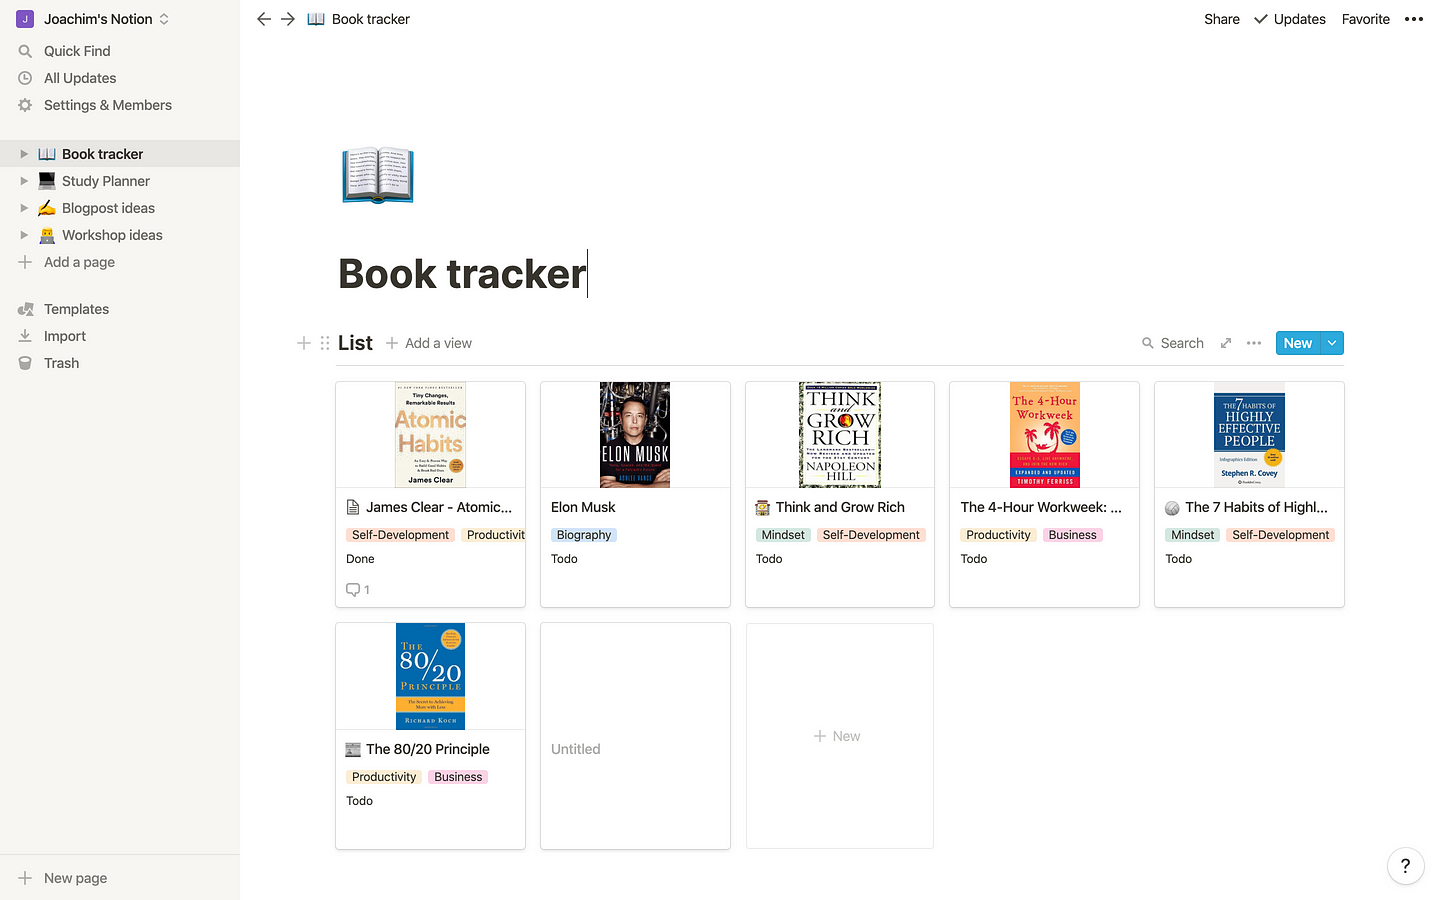 A book tracker template created in Notion.